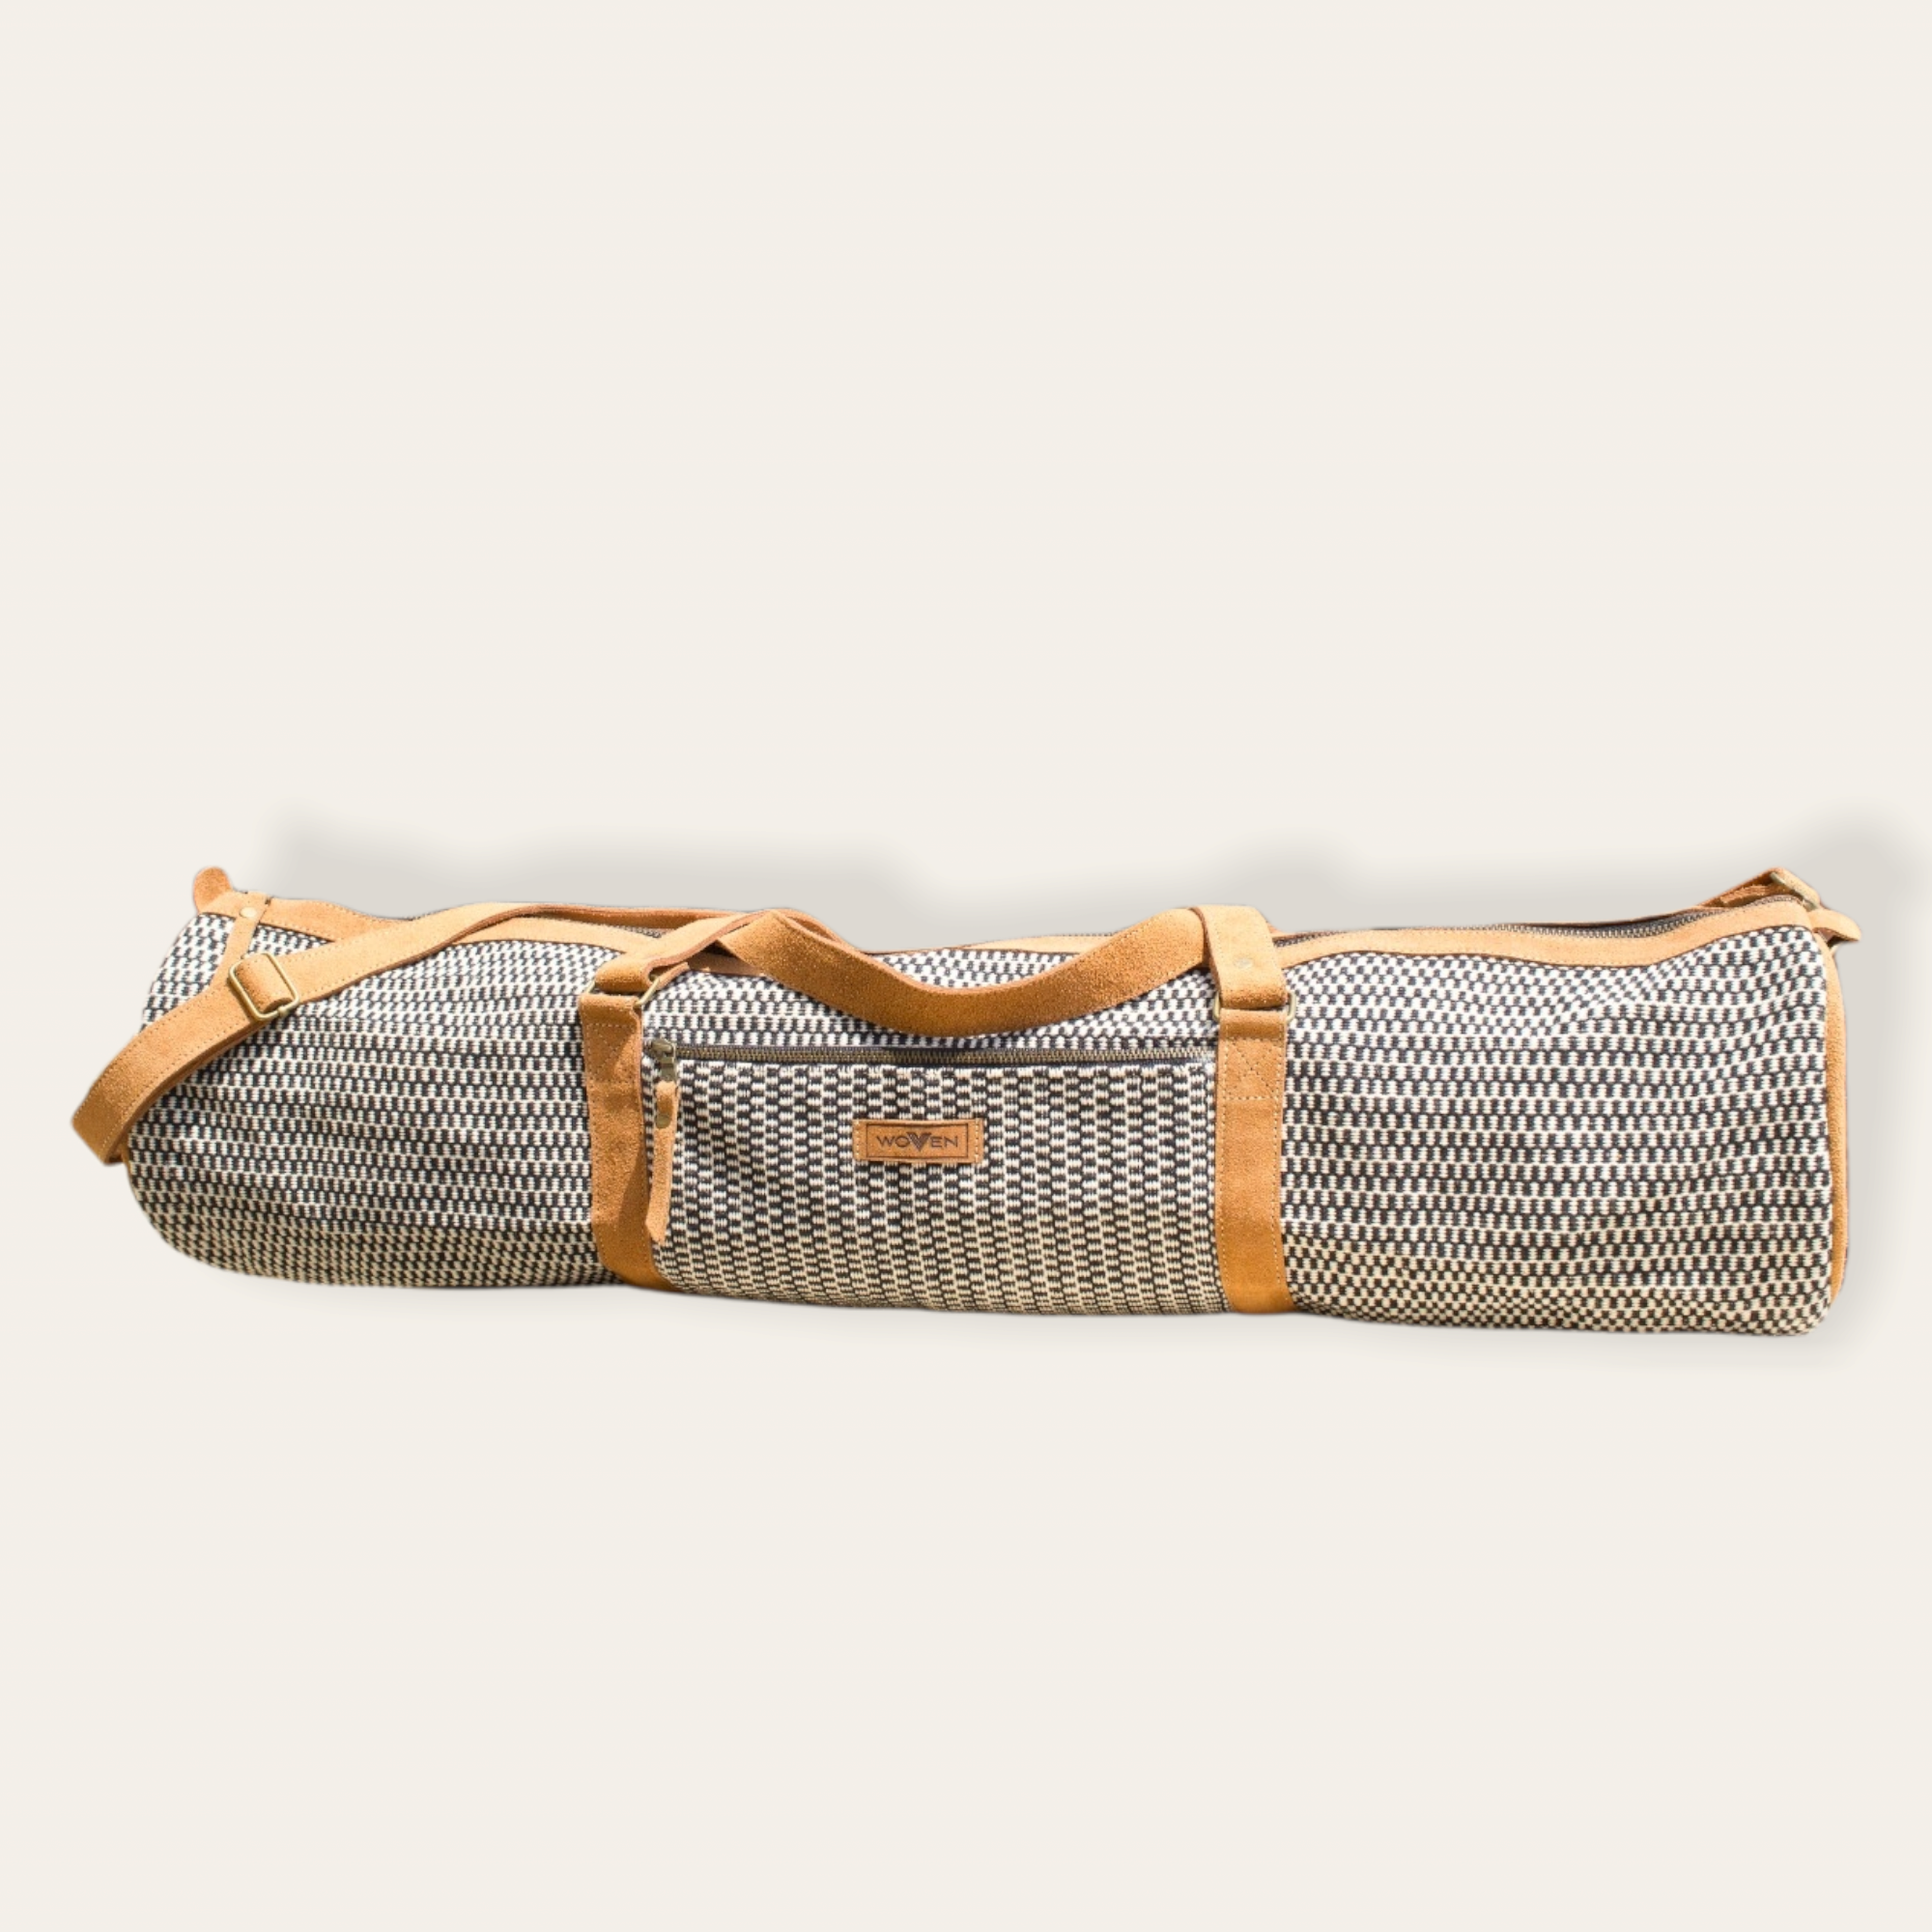 Hand- and shoulderbags